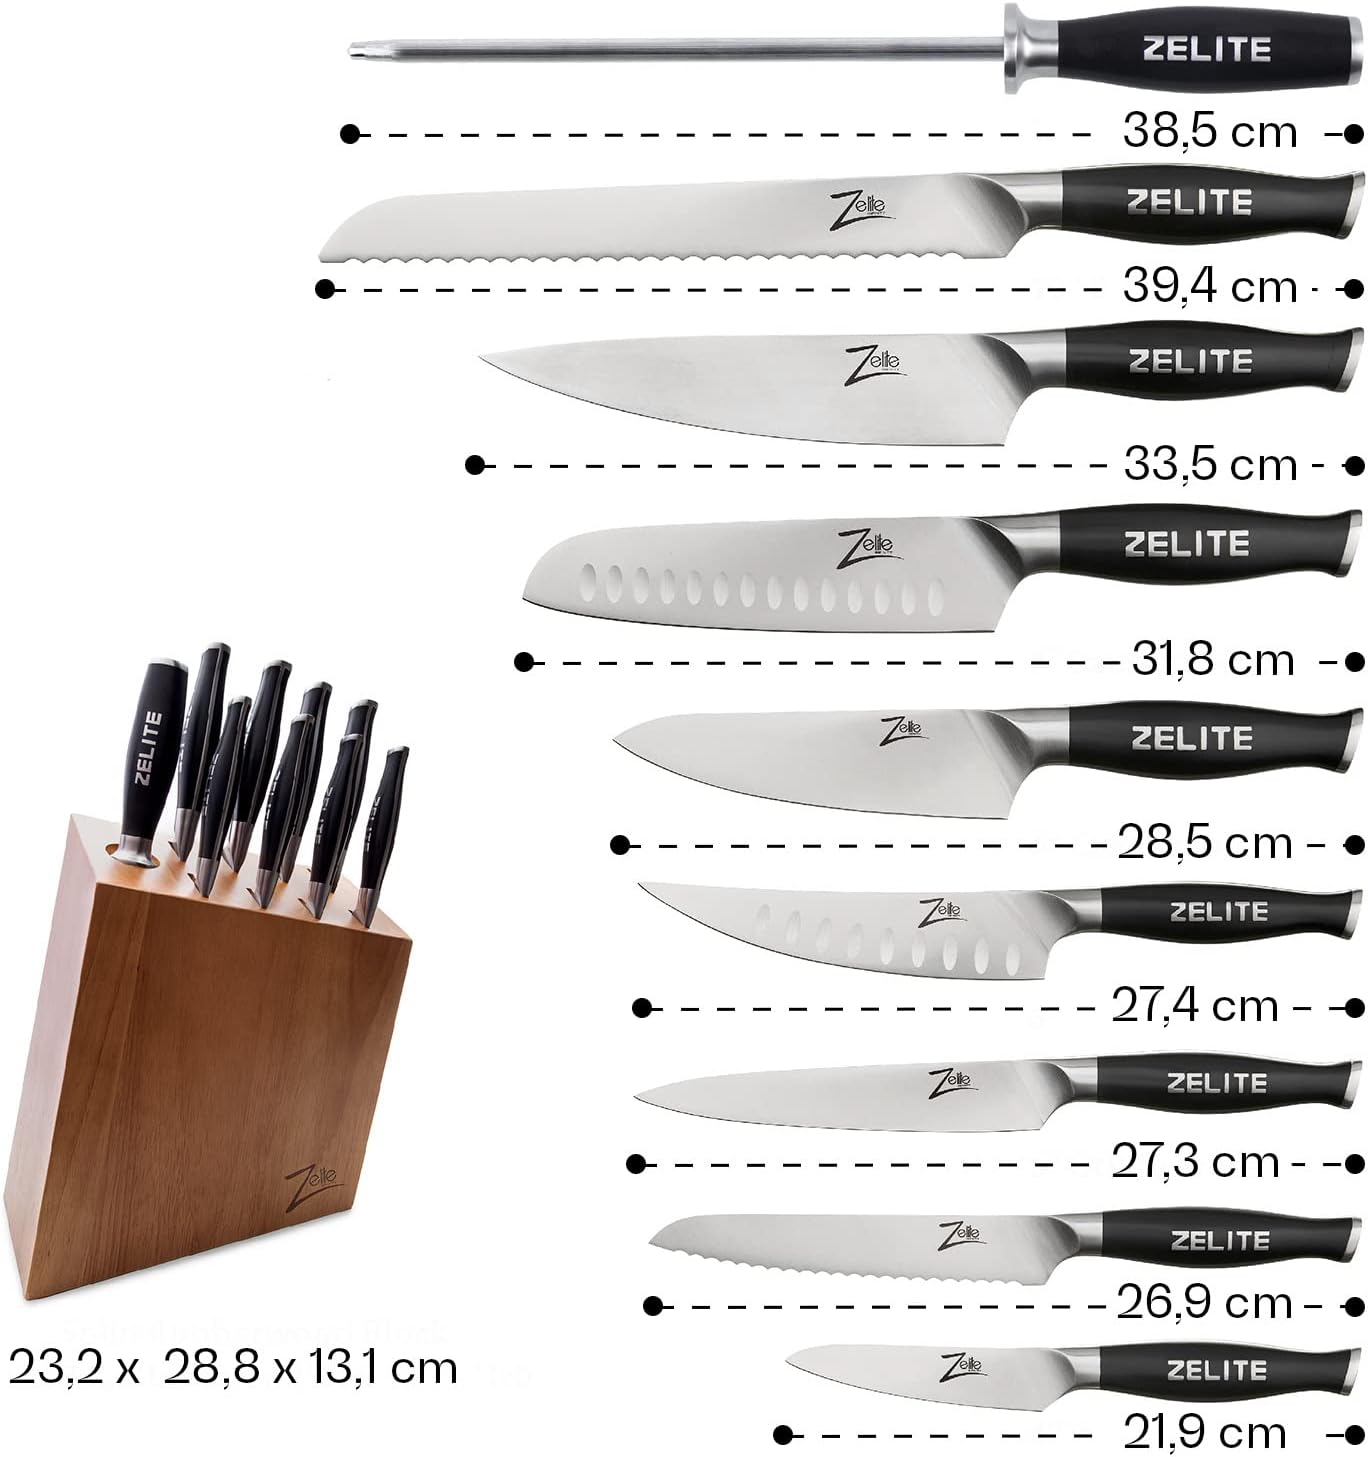 Zelite Infinity Knife Block Set (9-pc), Kitchen Knife Set, Knife Sets for Kitchen with Block - German Knife Set in High Carbon Stainless Steel - INCL. 8 Professional Knife Set  Honing Steel 10 Inch